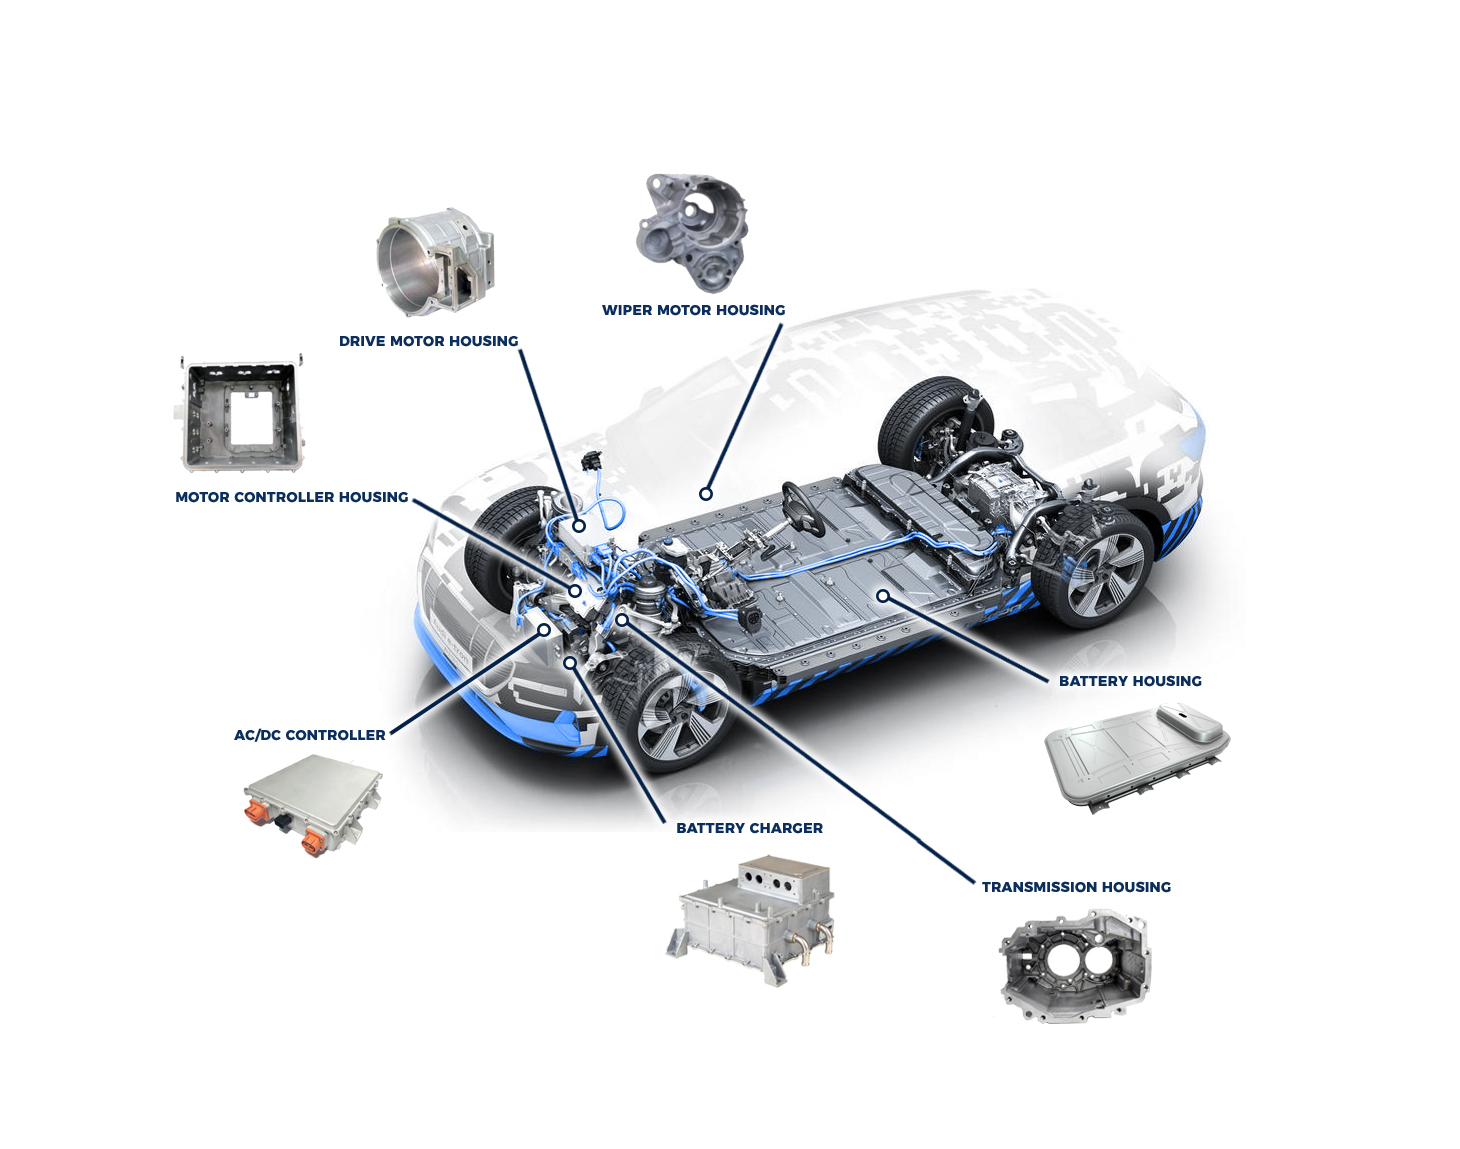 The trends of light-weight automotive aluminum die-casting parts